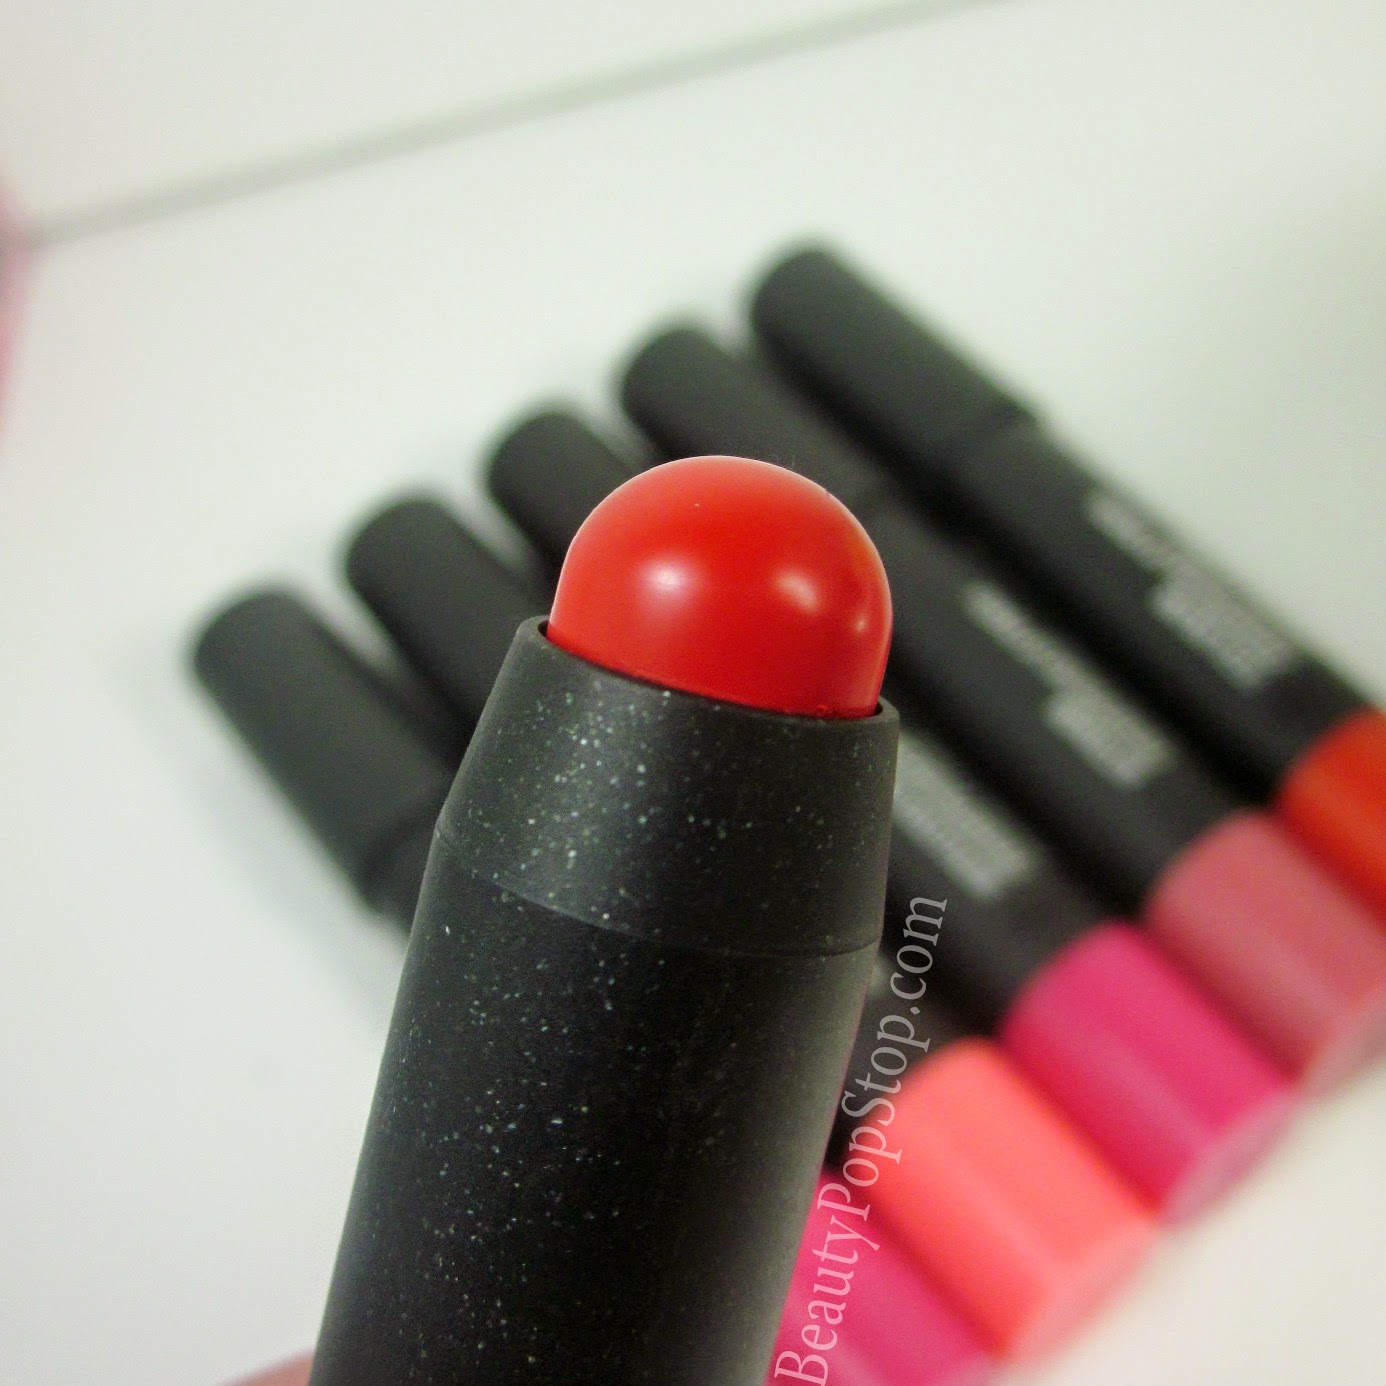 mac patentpolish lip pencil Berry Bold swatch and review